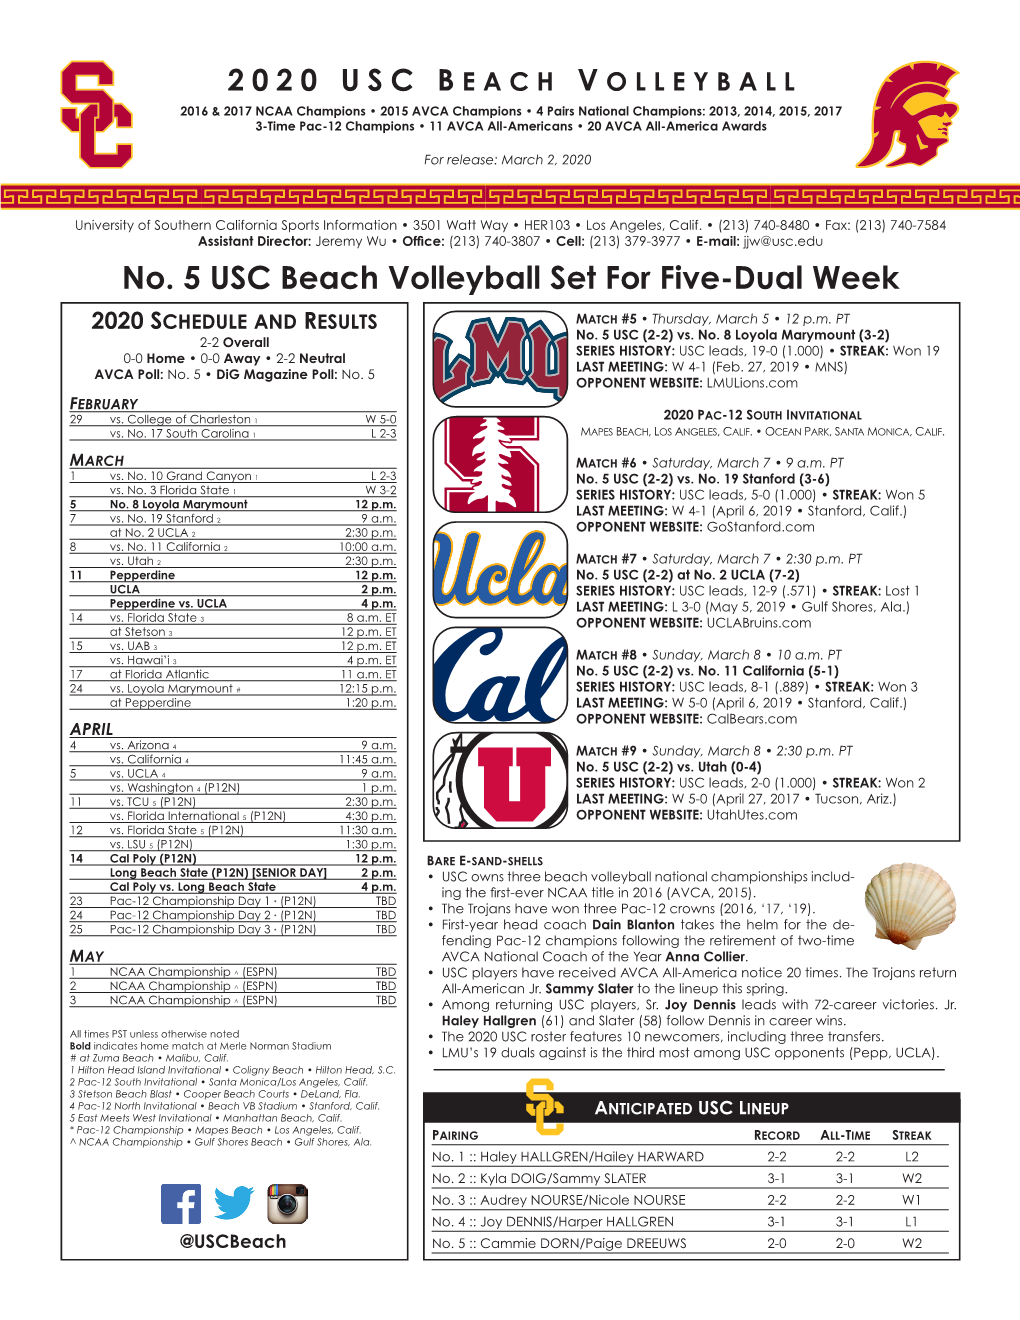 No. 5 USC Beach Volleyball Set for Five-Dual Week 2020 Schedule and Results Match #5 • Thursday, March 5 • 12 P.M